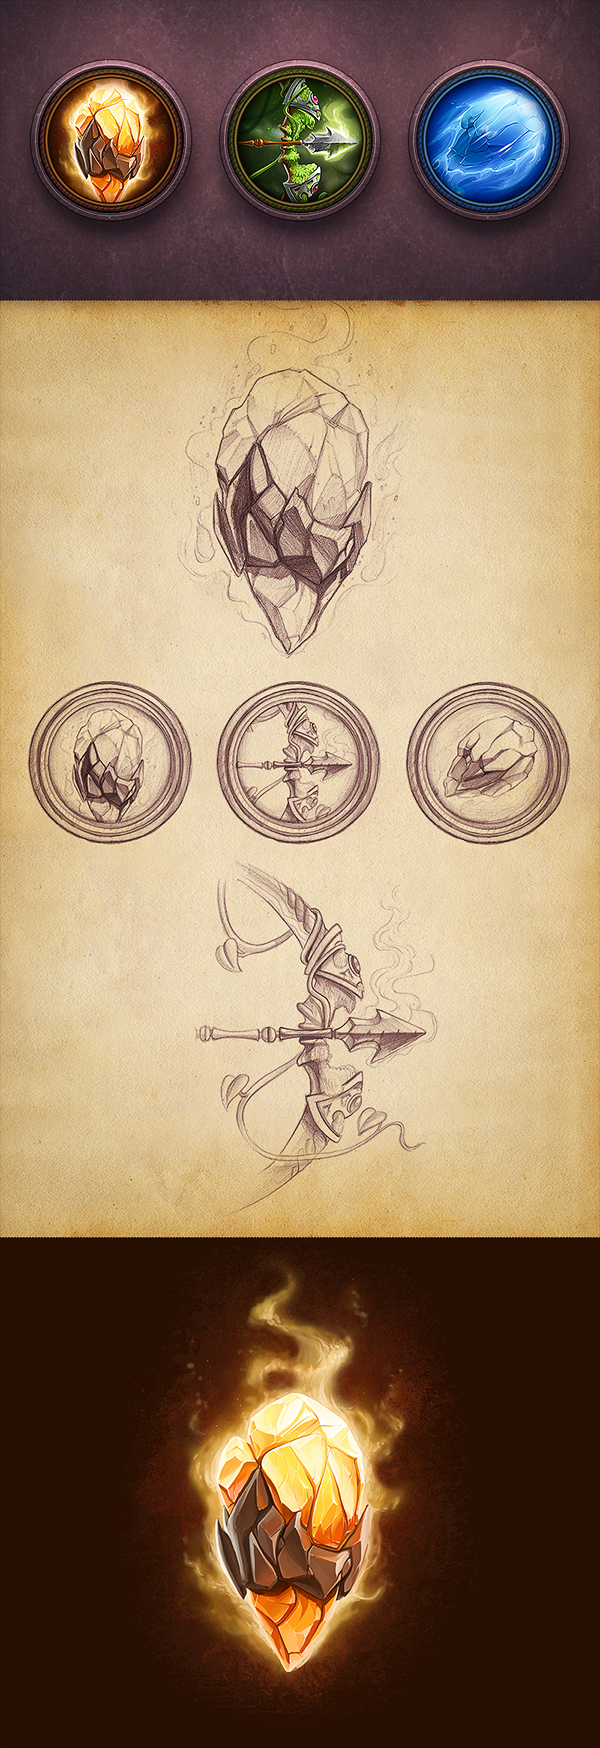 ios game iPad iphone sketch Character UI design rpg dragon card icons Interface grass house